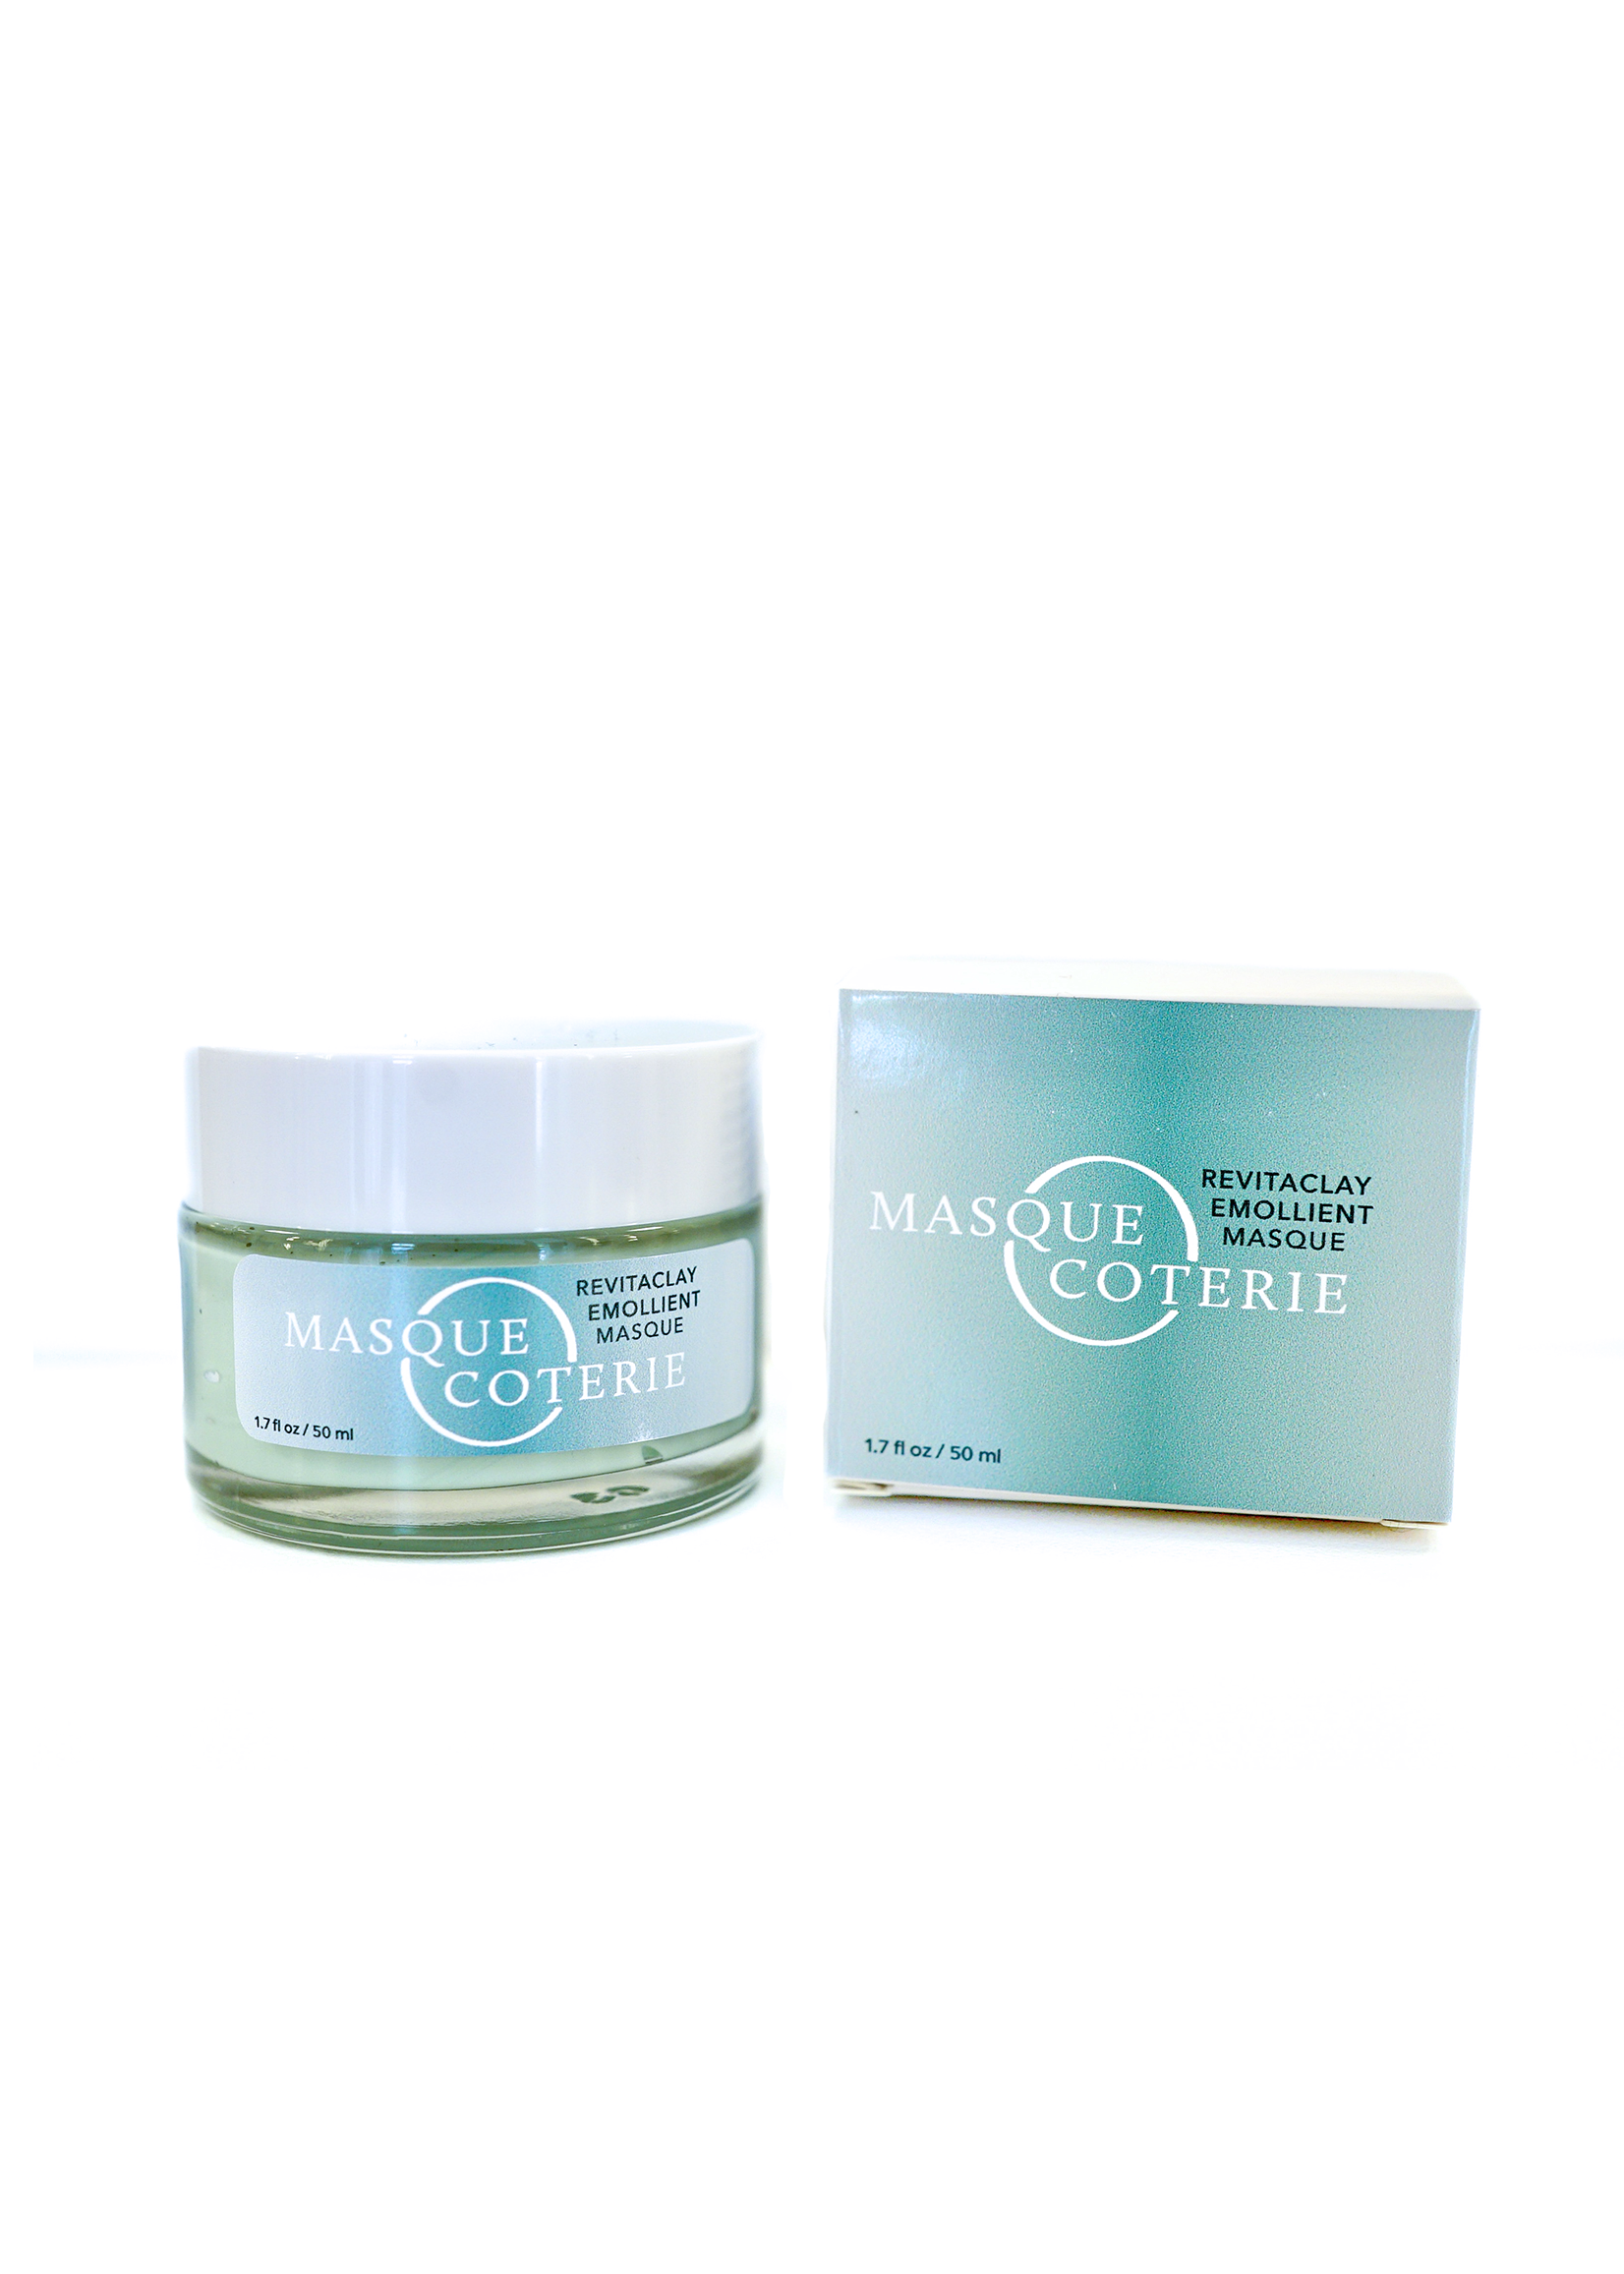 Masque Coterie RevitaClay Mask